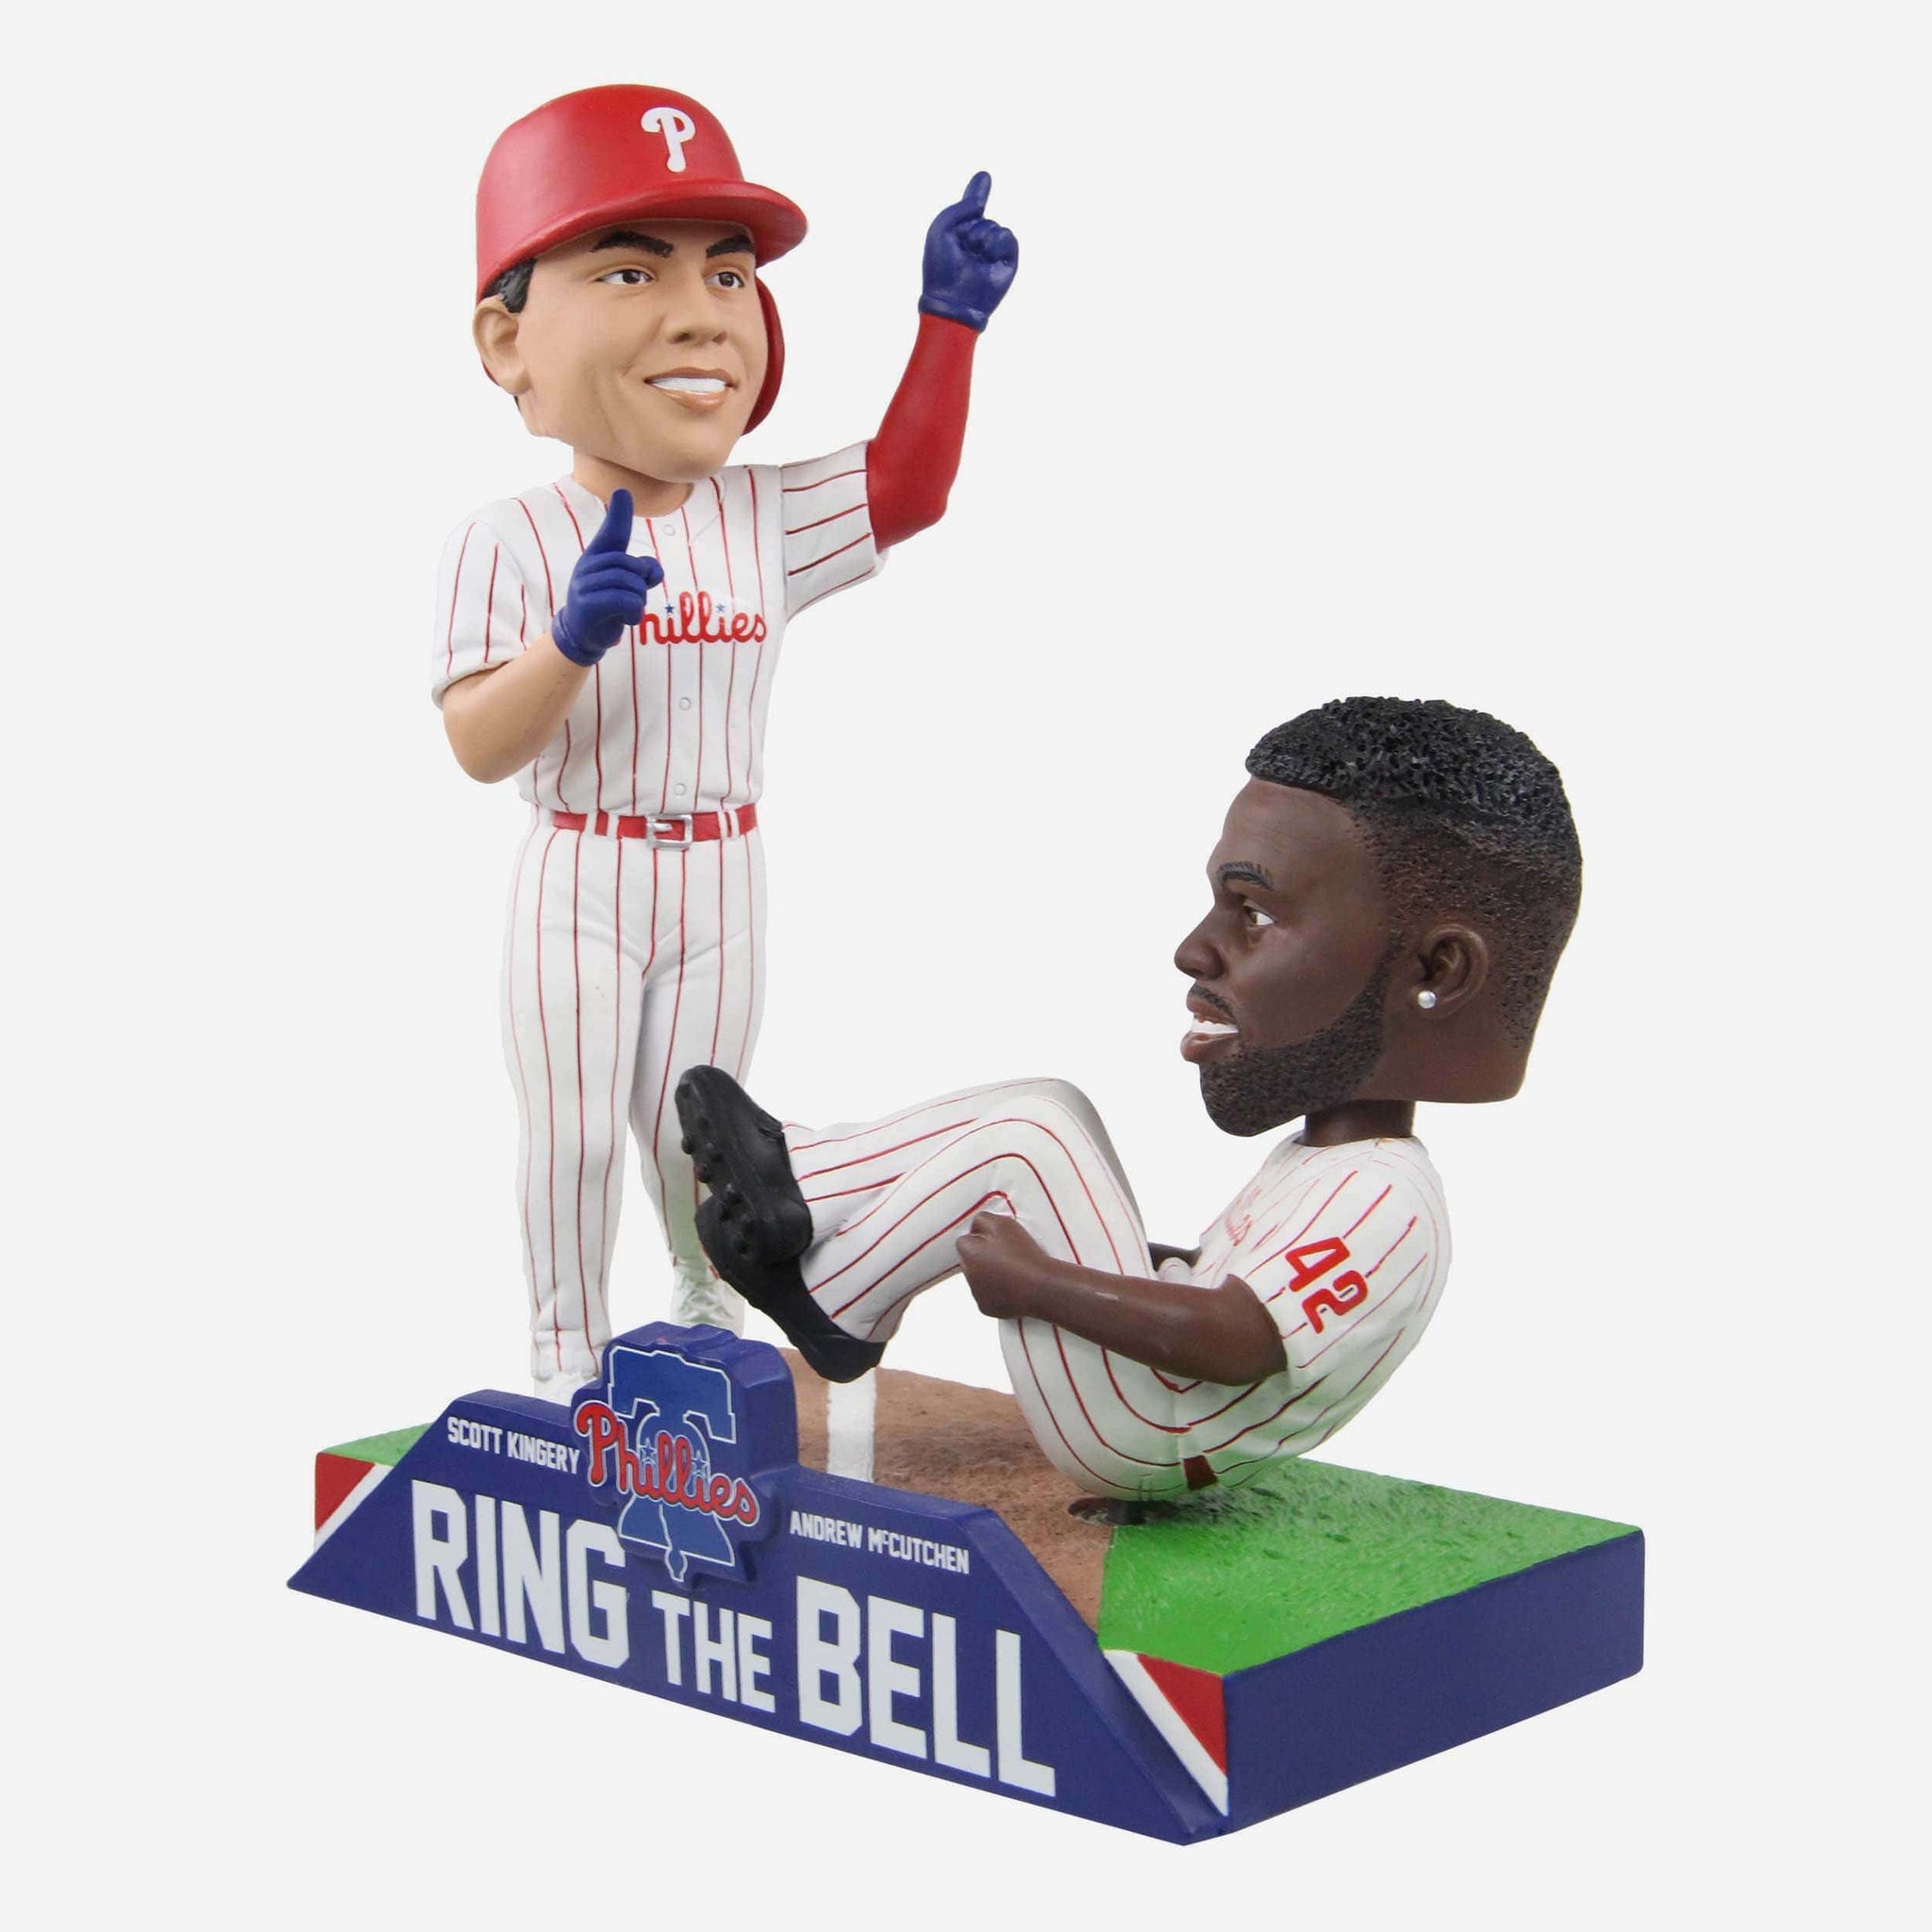 Here's how to get a Scott Kingery, Andrew McCutchen bobblehead